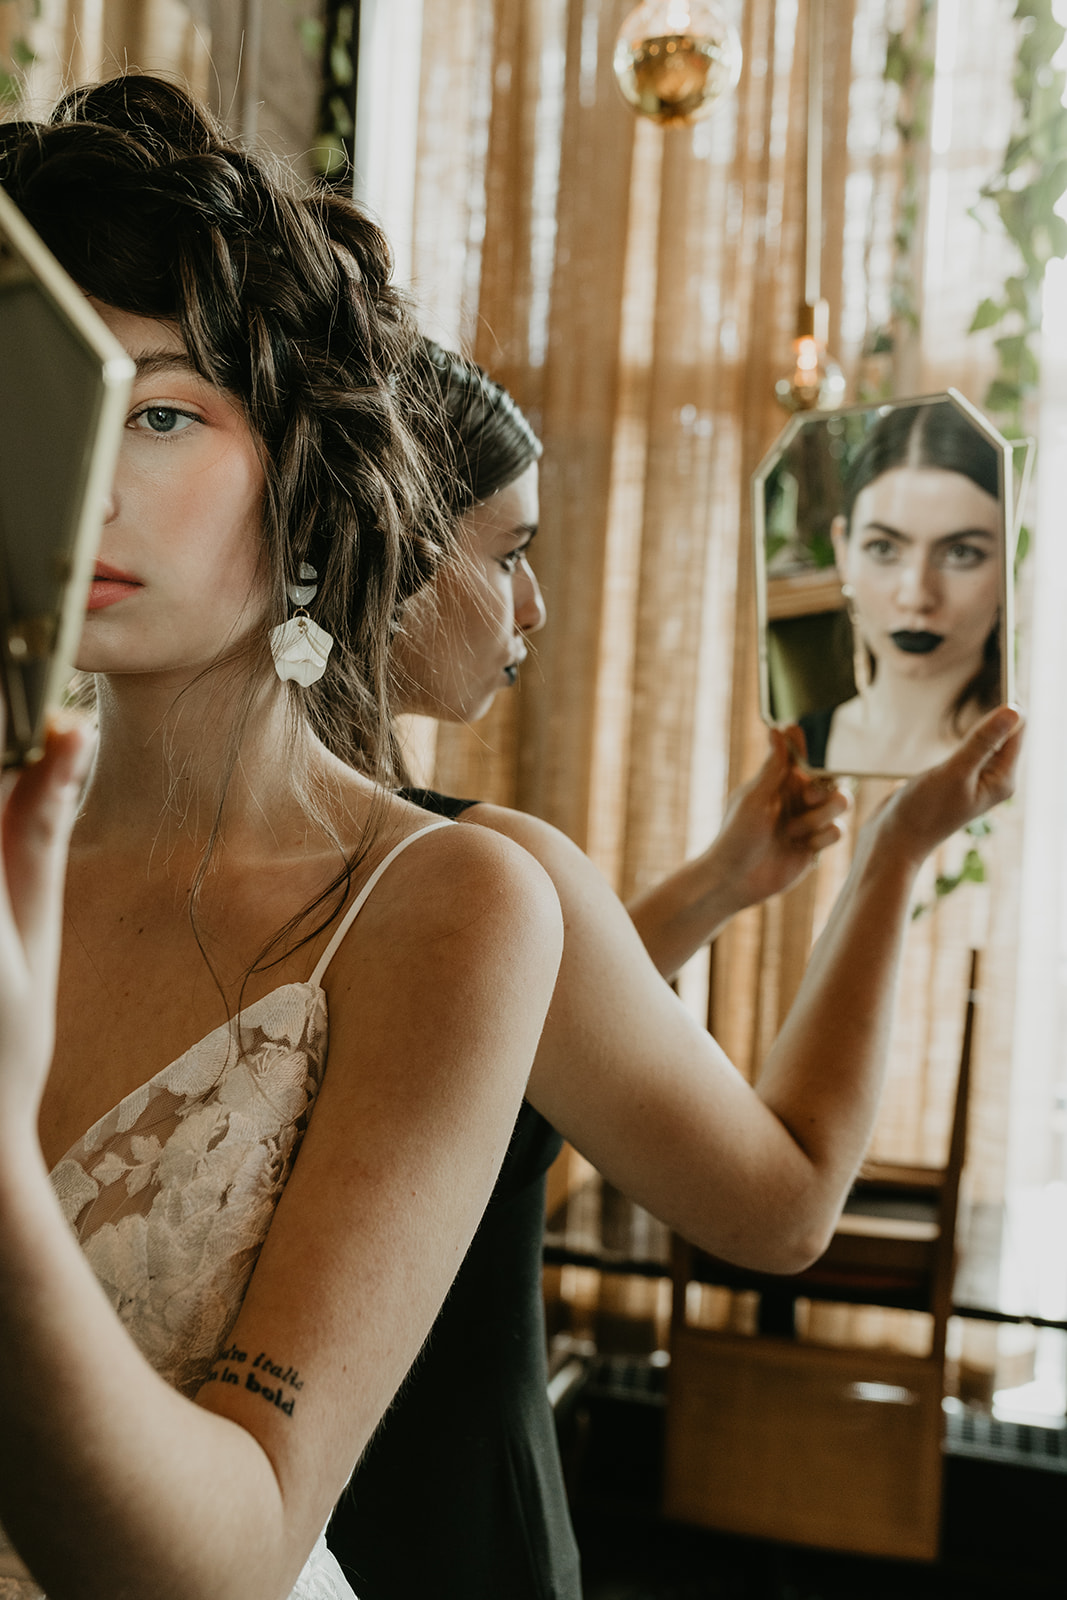 Halloween makeup ideas in this October bridal editorial